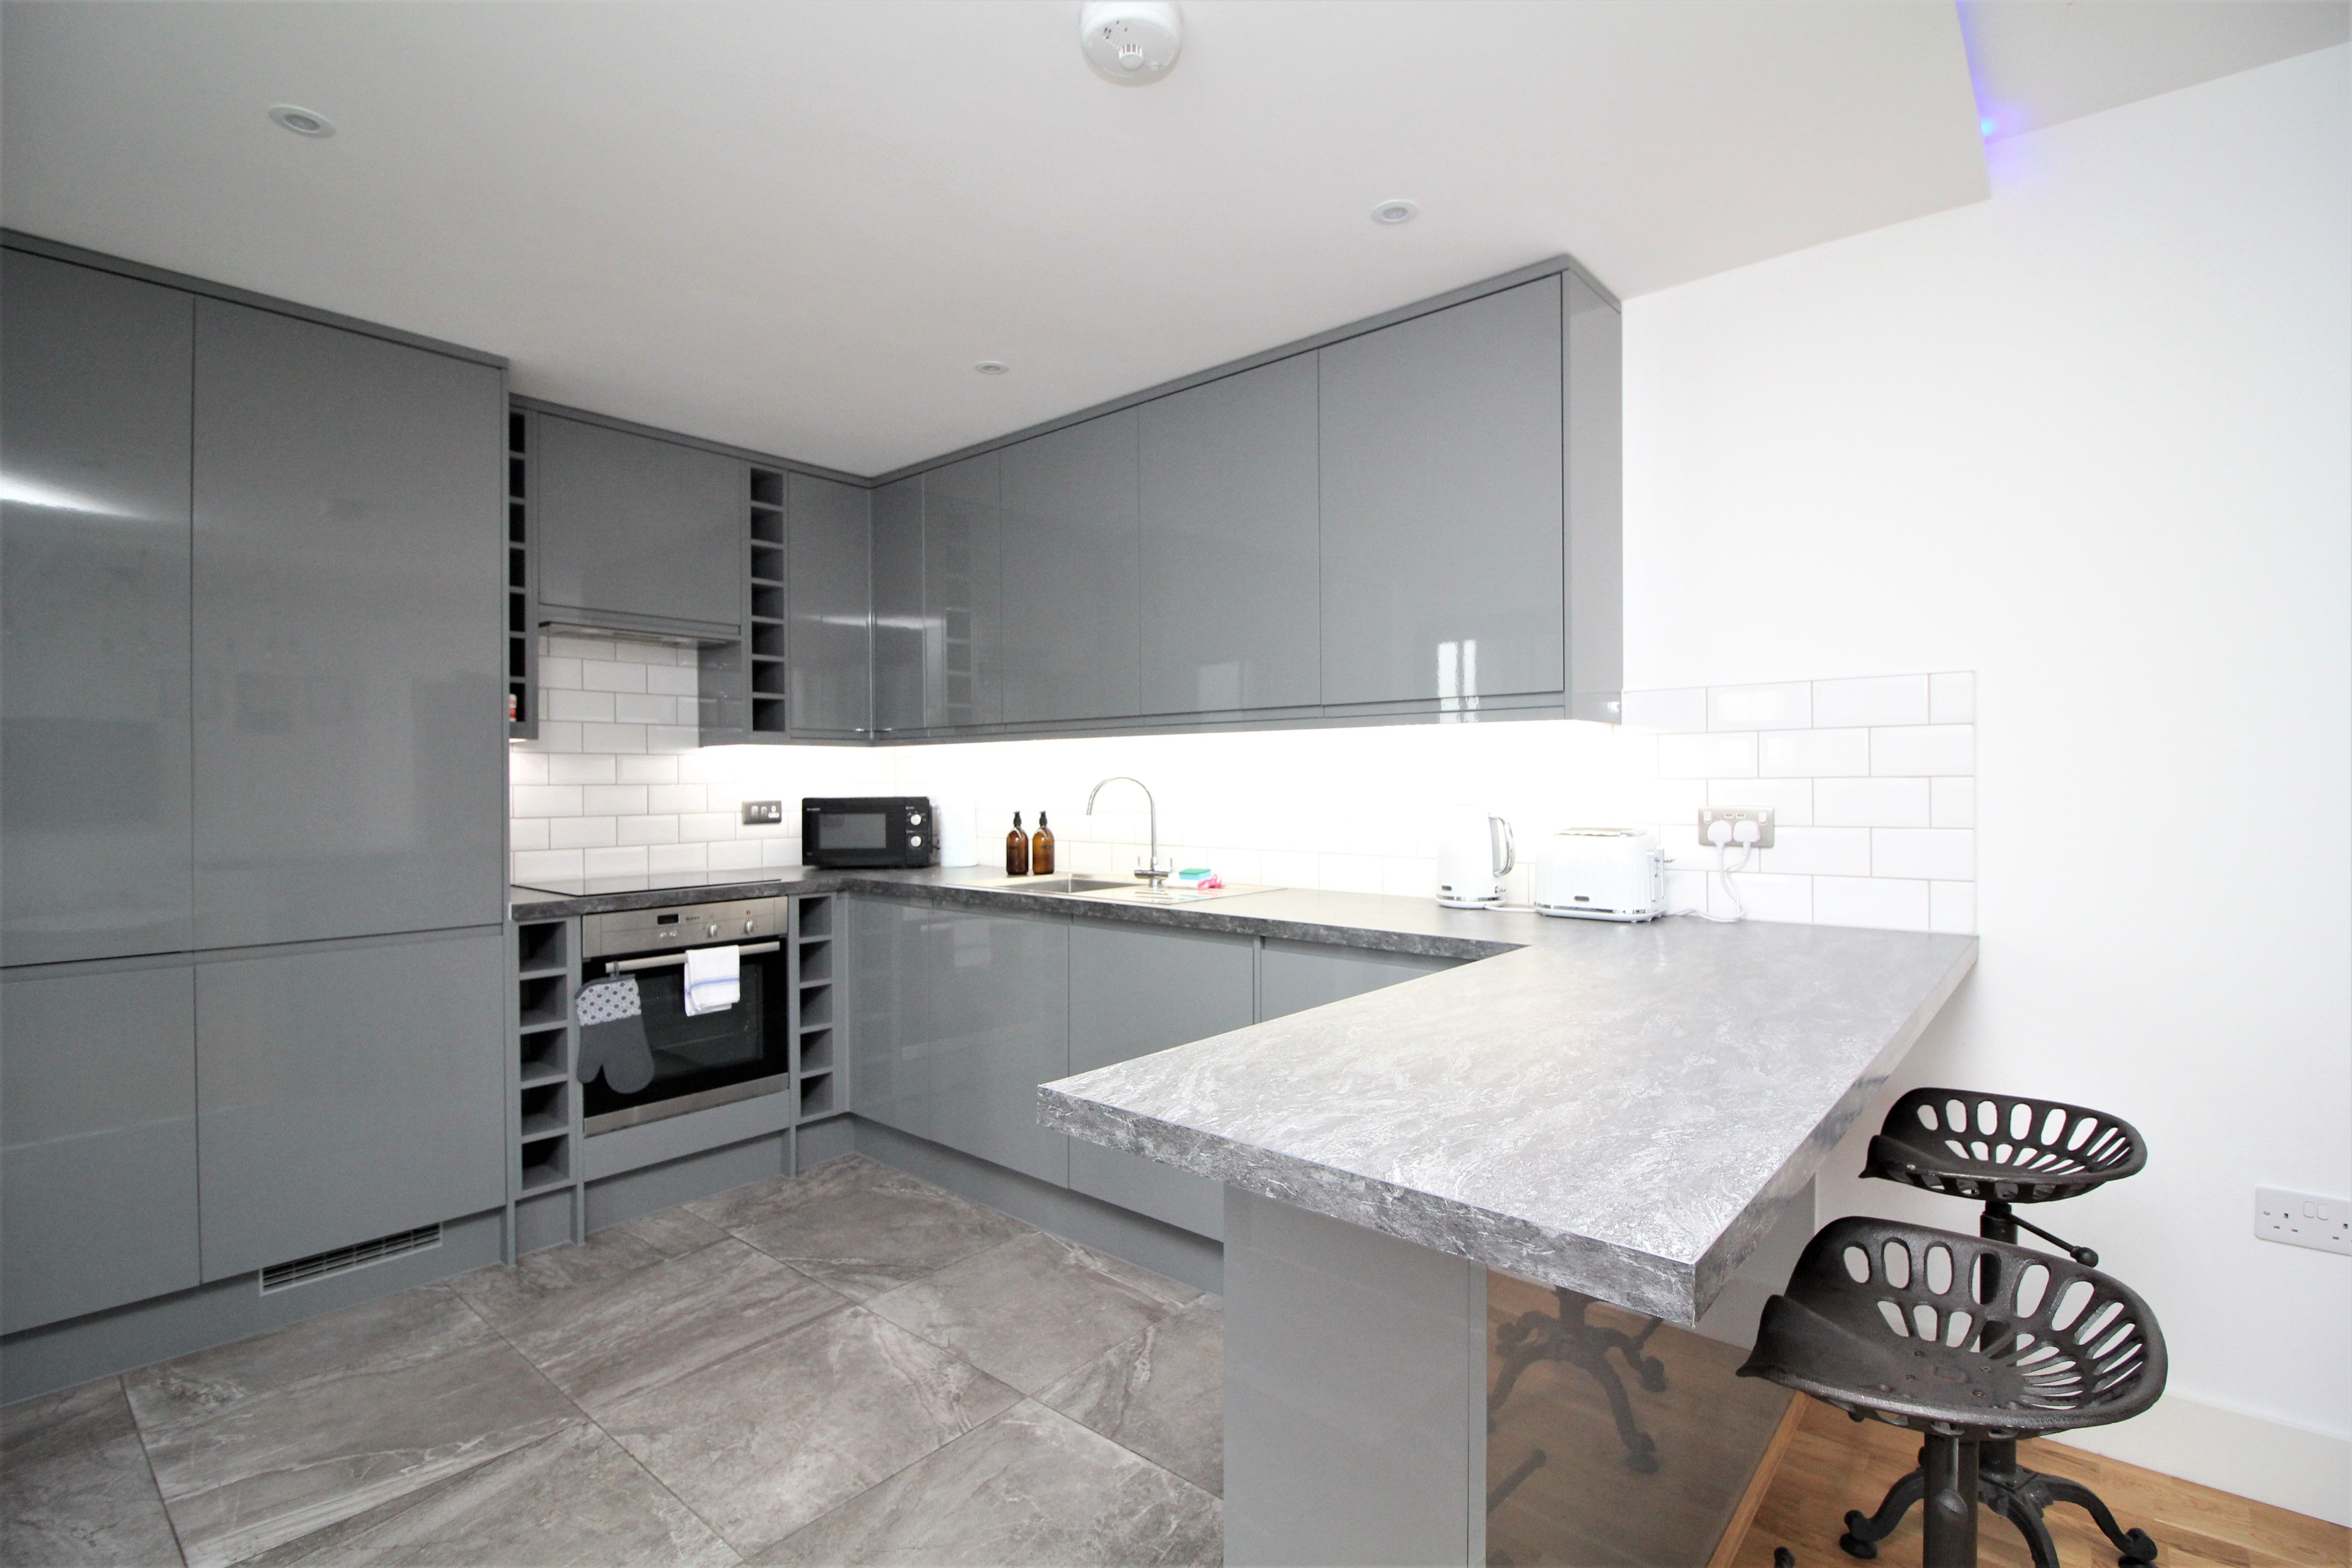 2 bed flat to rent in Gladstone Road, Broadstairs - Property Image 1